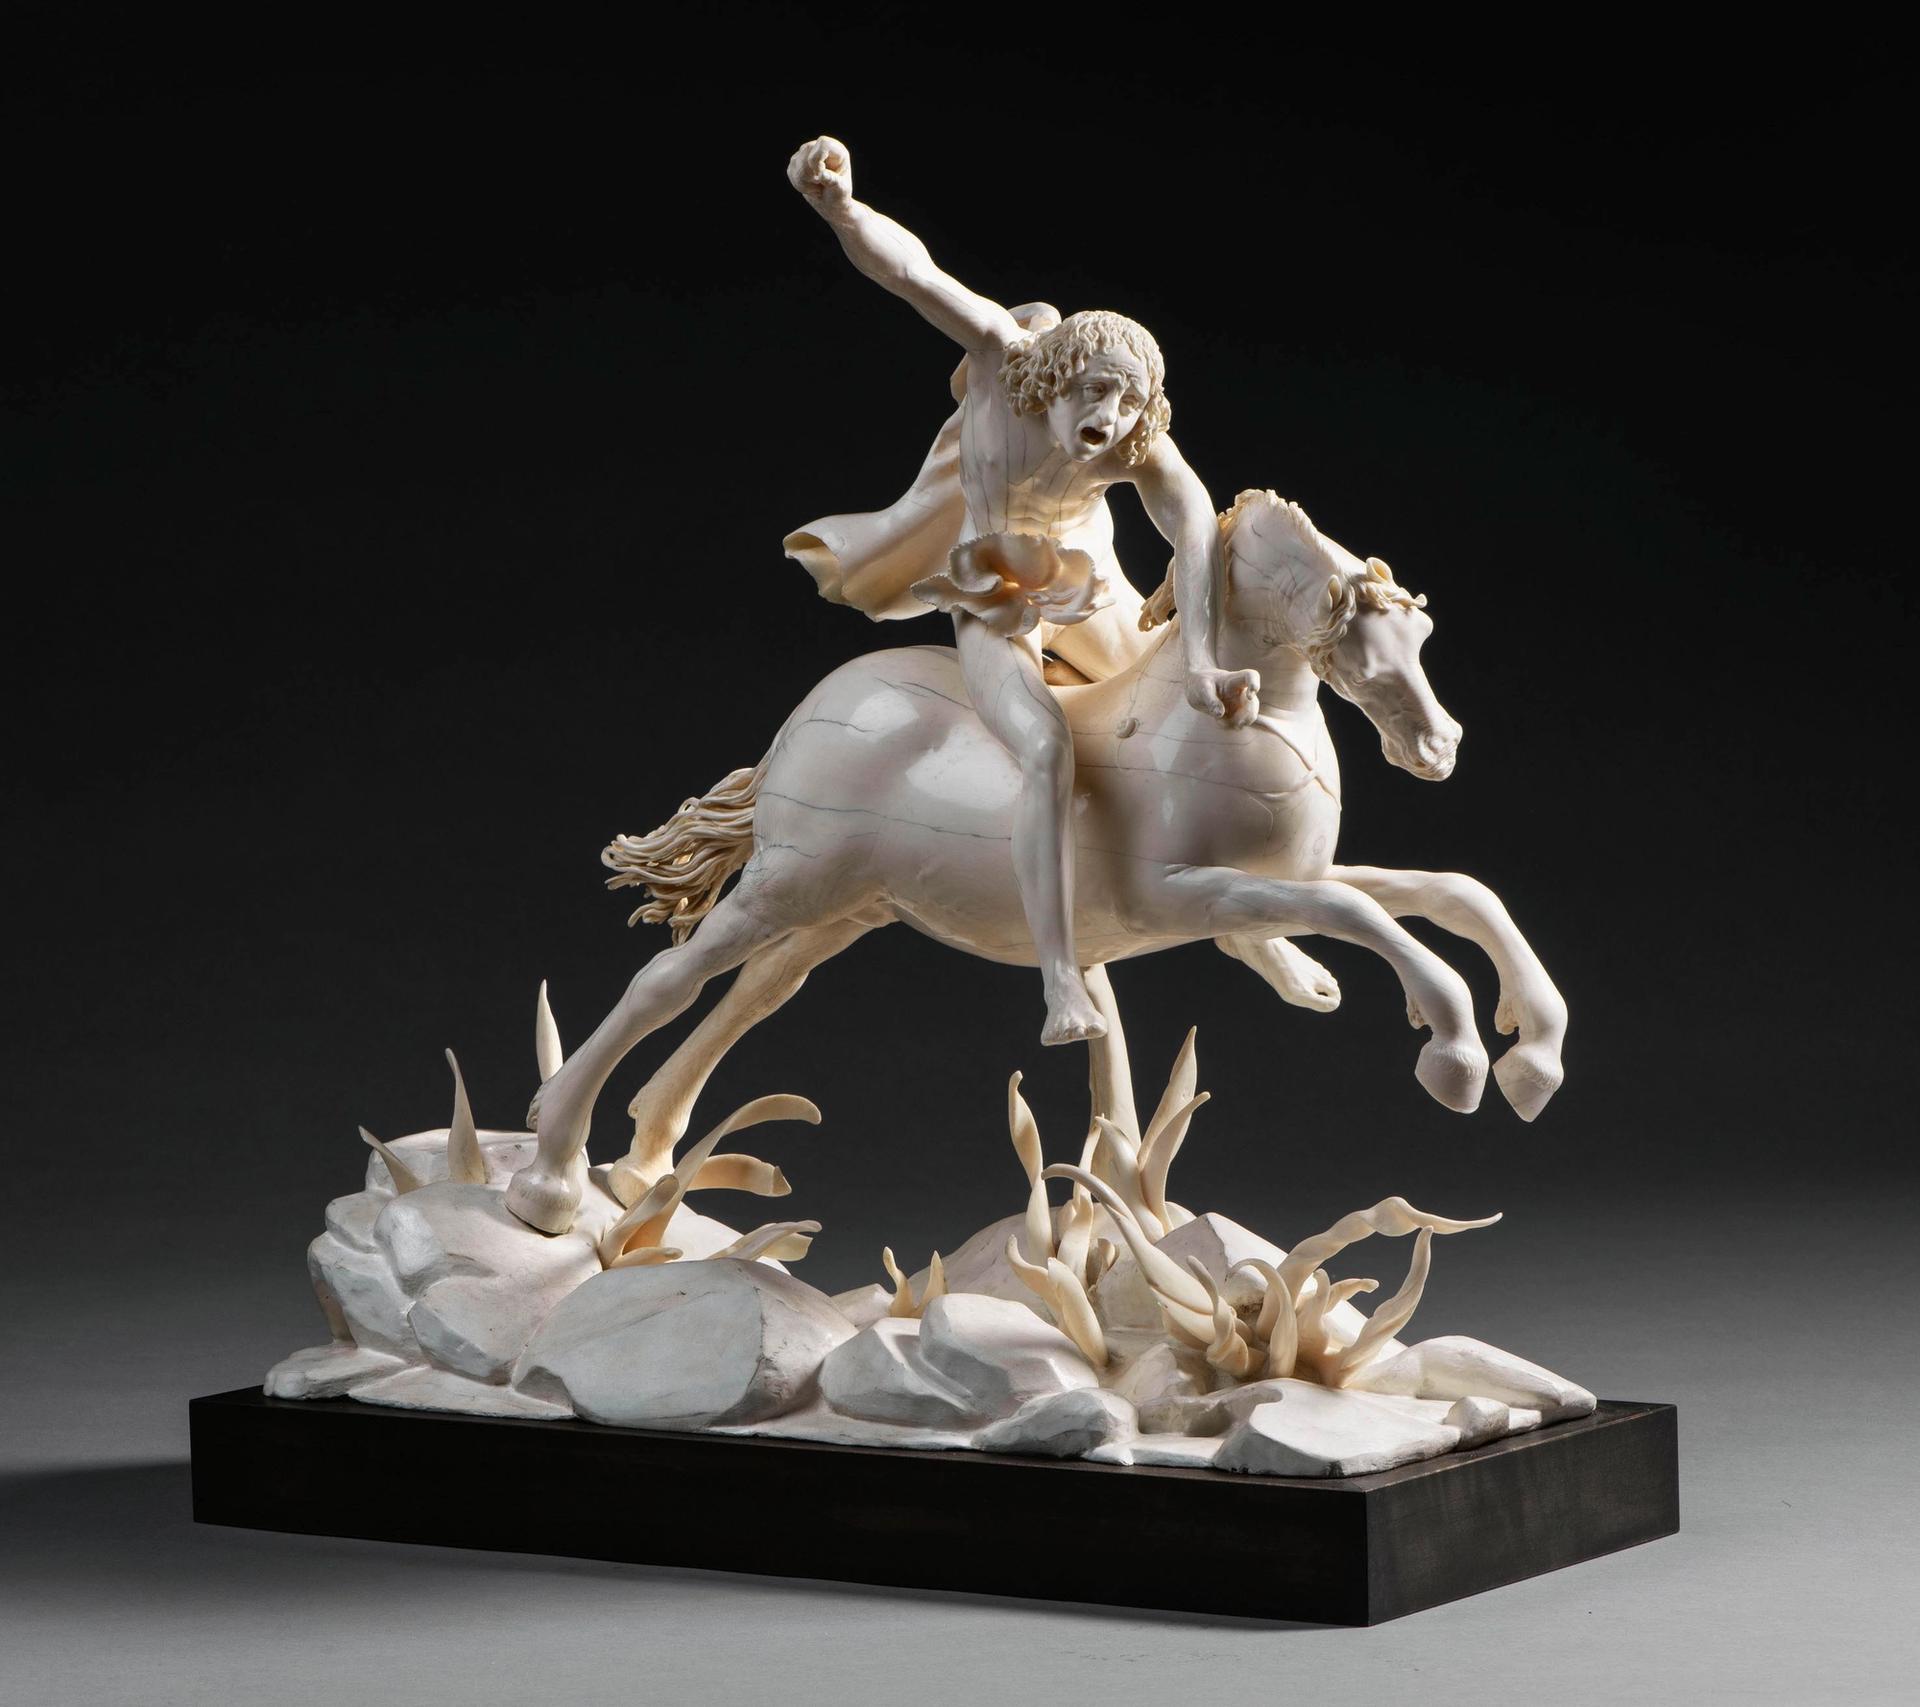 Fury on a Leaping Horse (1610) by Furienmeister (master of the furies) © Liebieghaus Skulpturensammlung